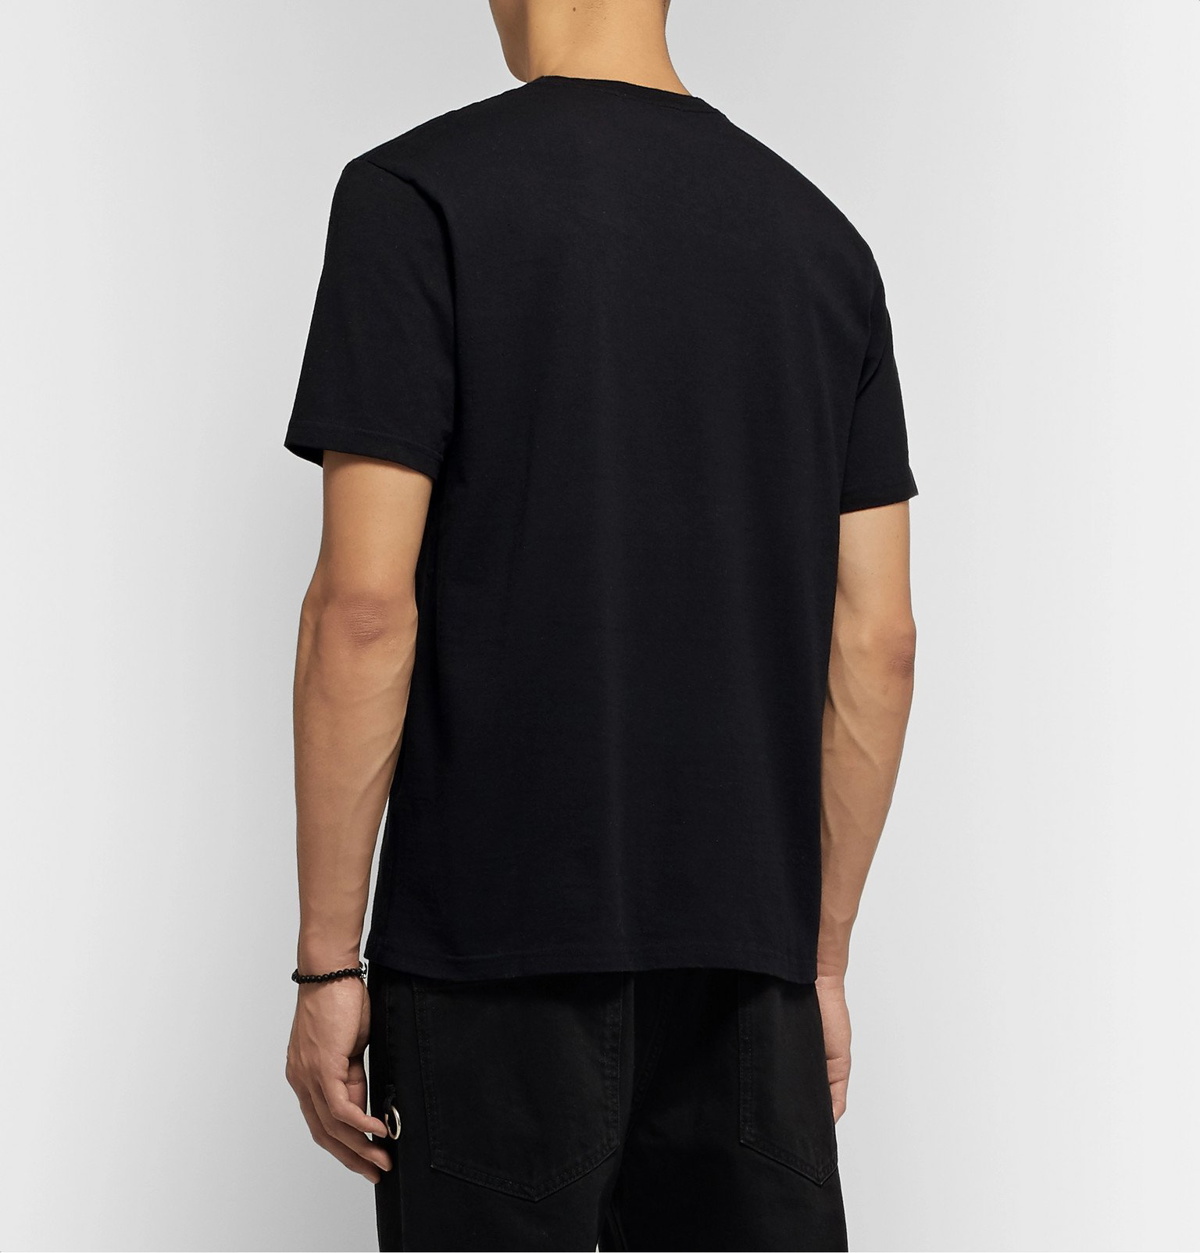 Undercover - Printed Cotton-Jersey T-Shirt - Black Undercover